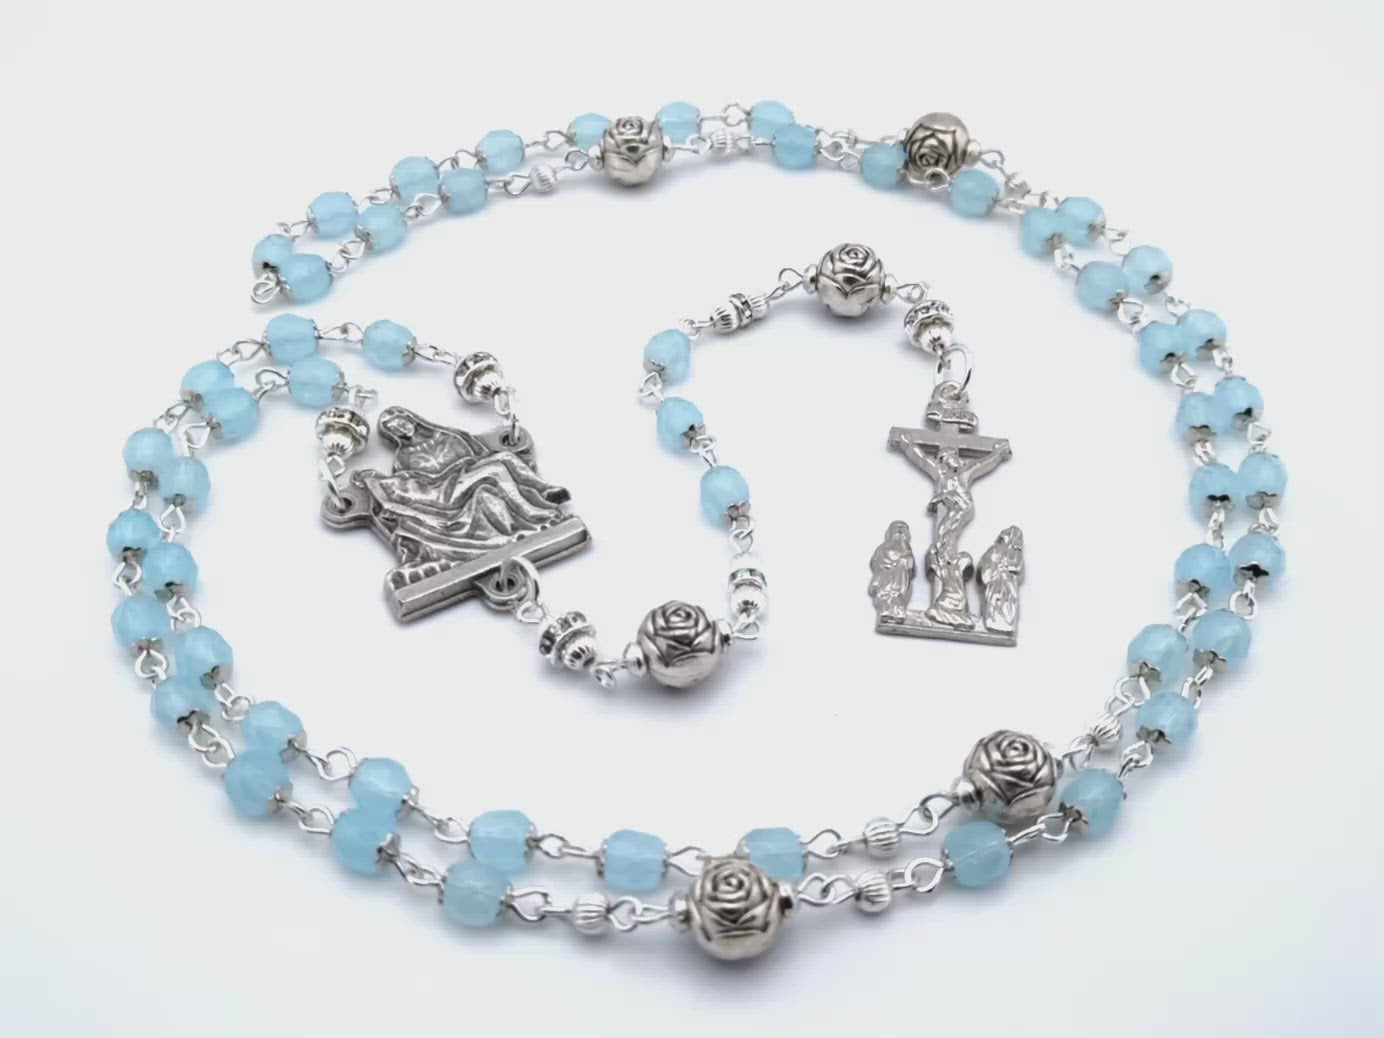 La Pieta unique rosary beads with pale blue glass and silver roses beads, silver two Marys crucifix and La Pieta centre medal.